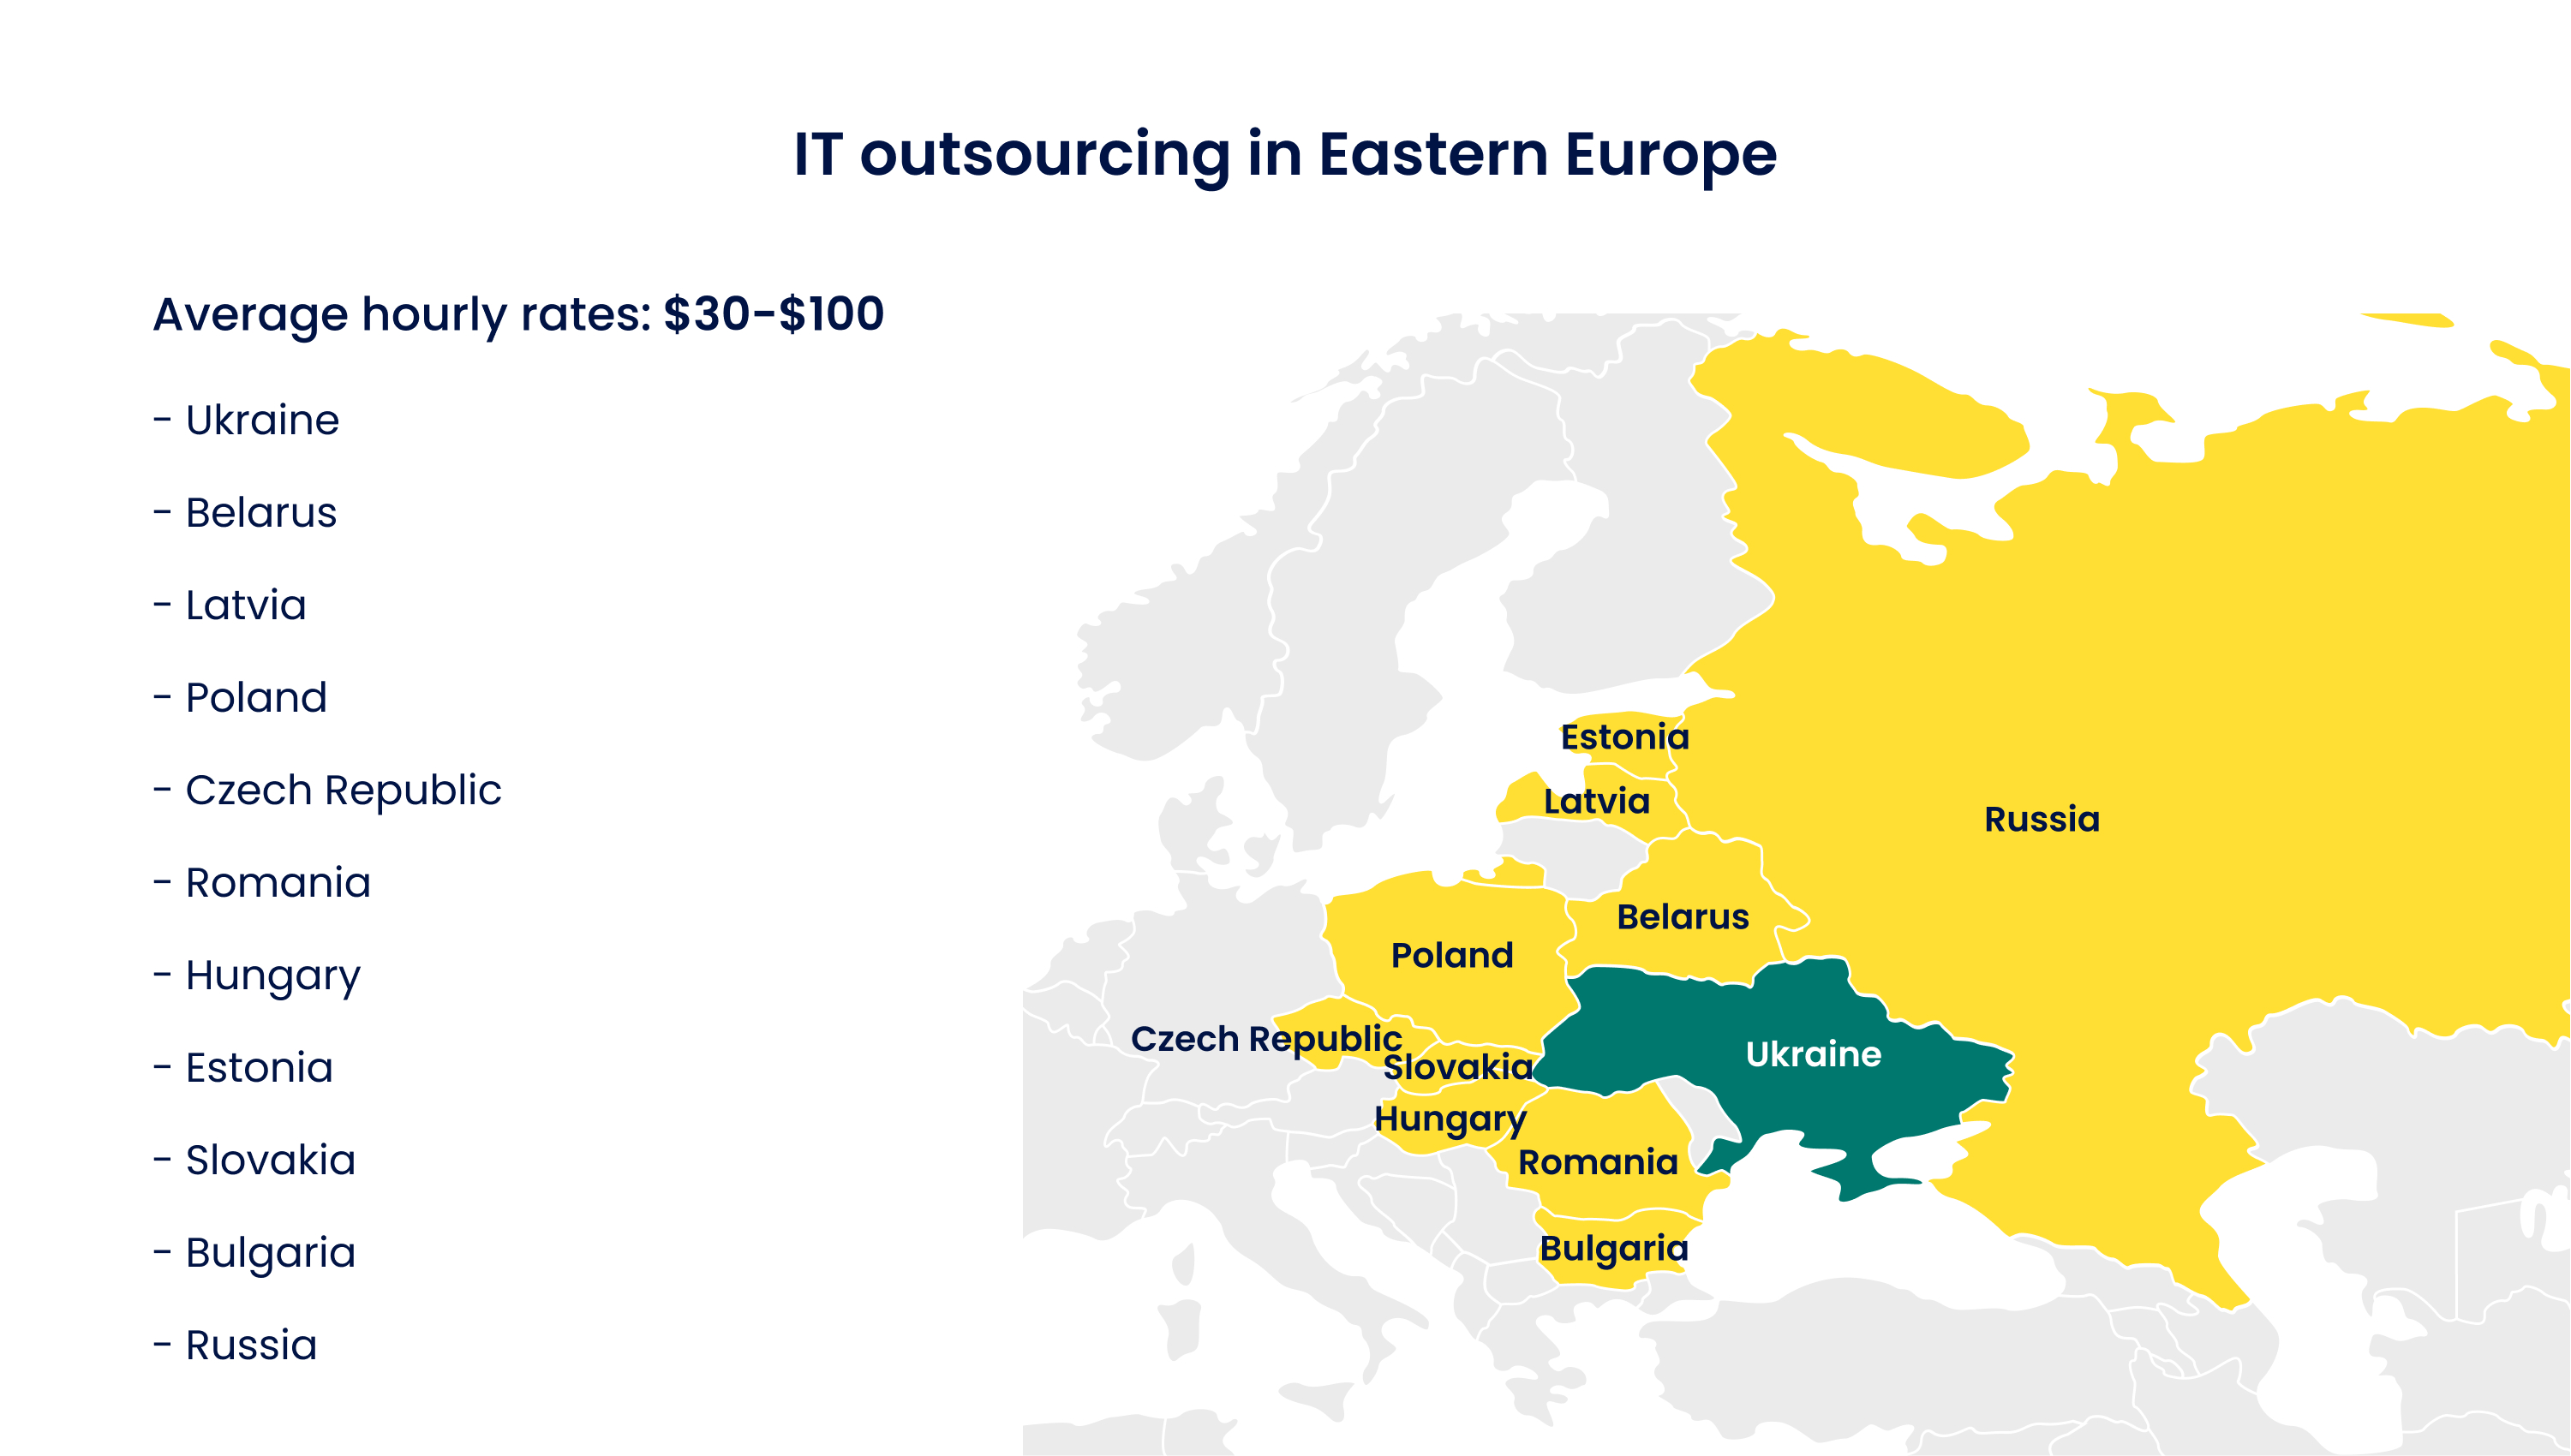 IT outsourcing in Eastern Europe